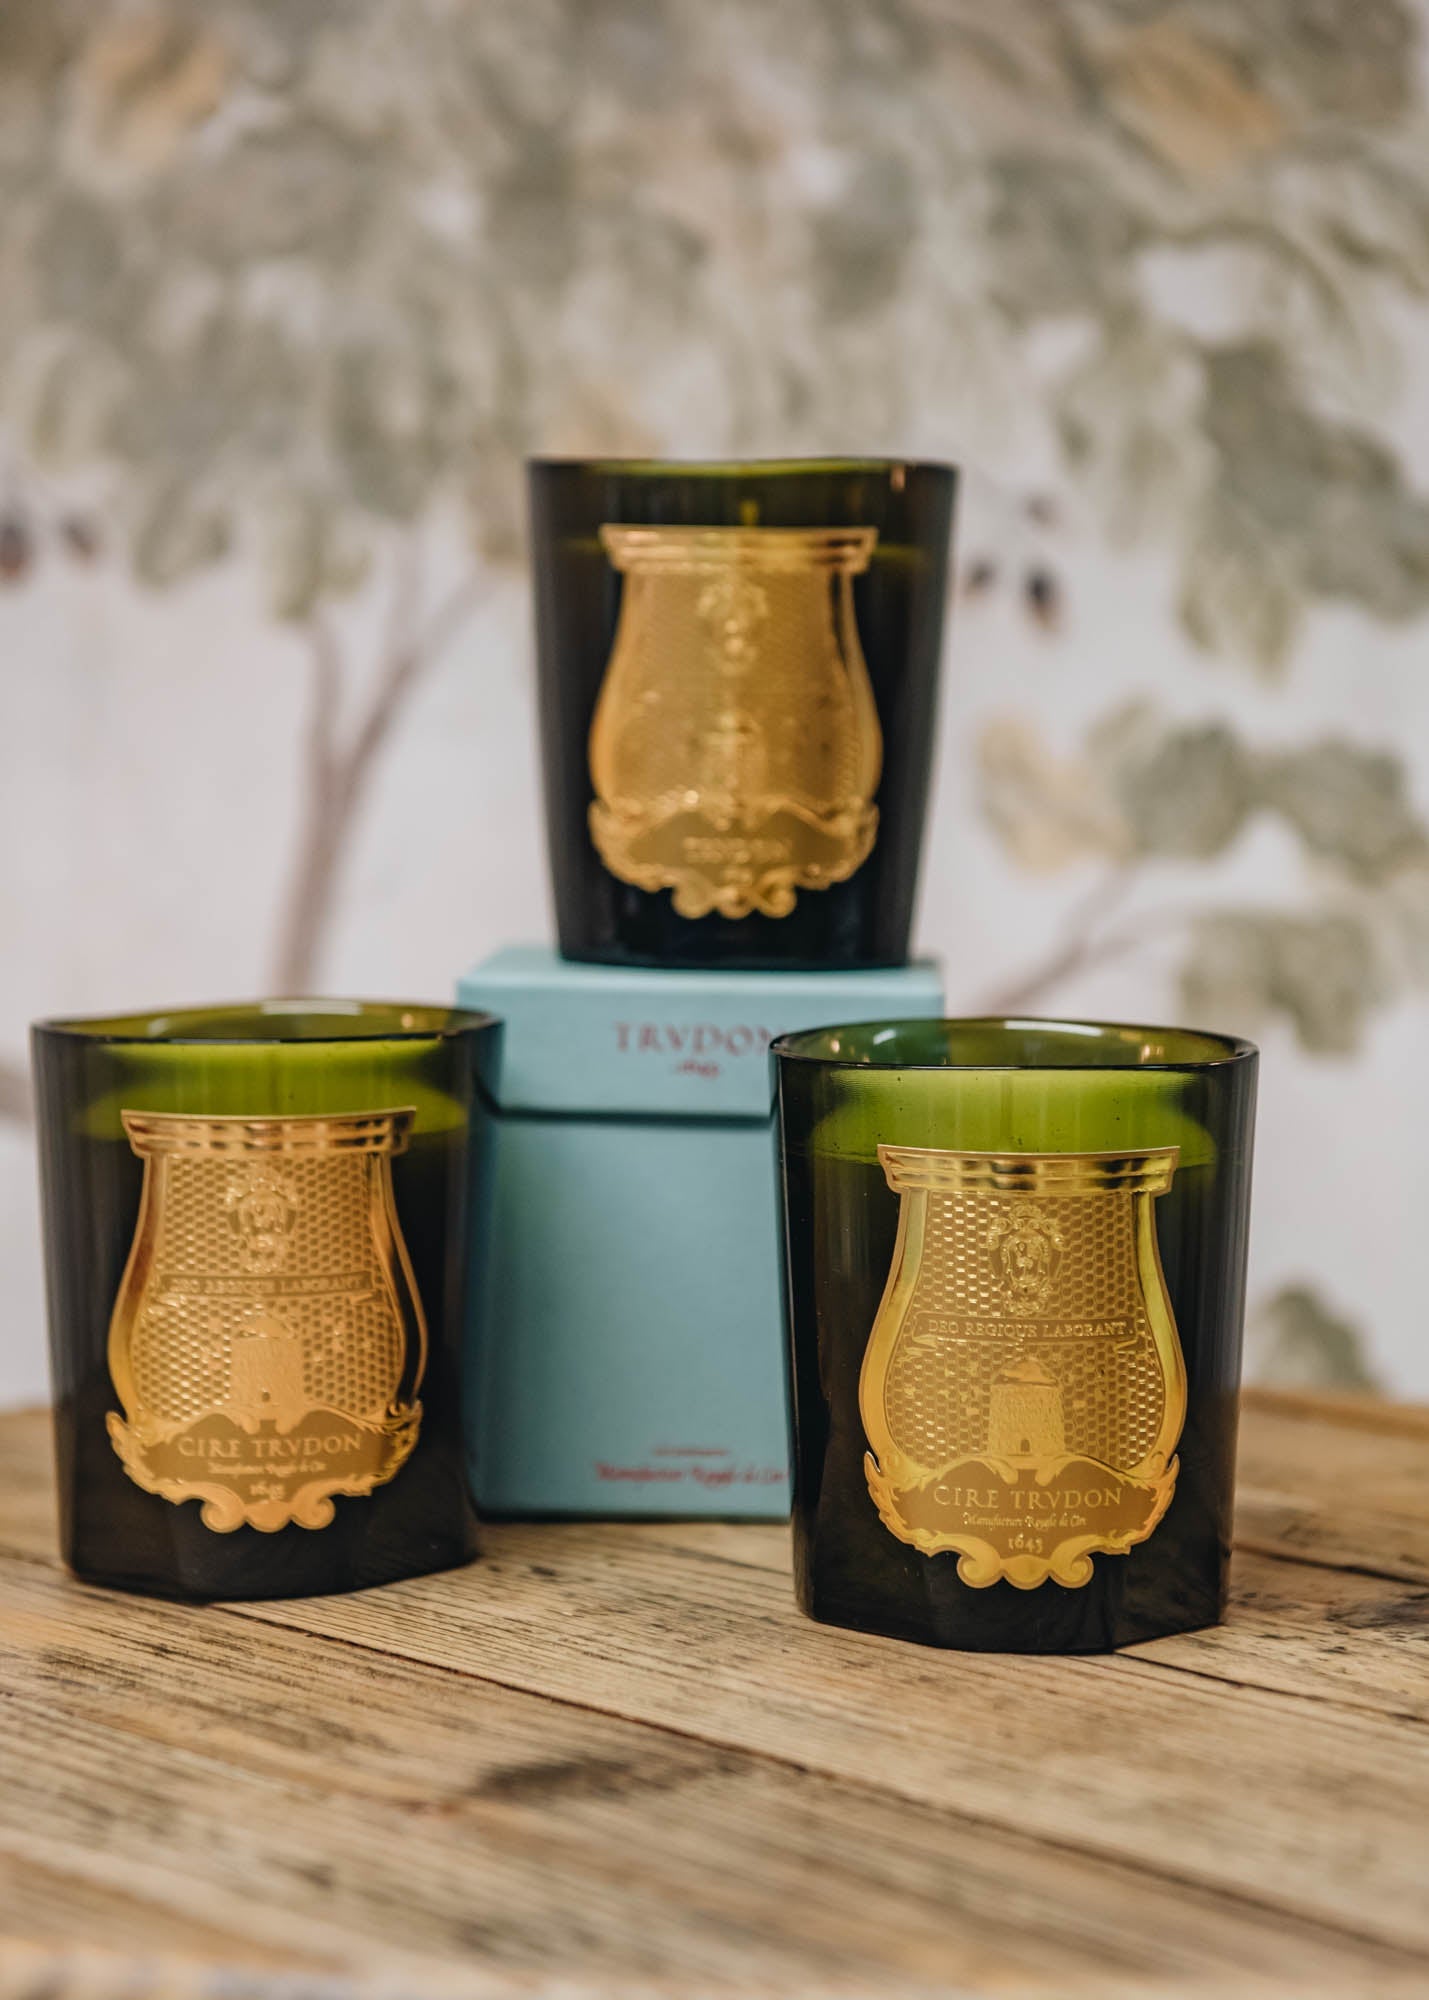 Cire Trudon Classic Scented Candles